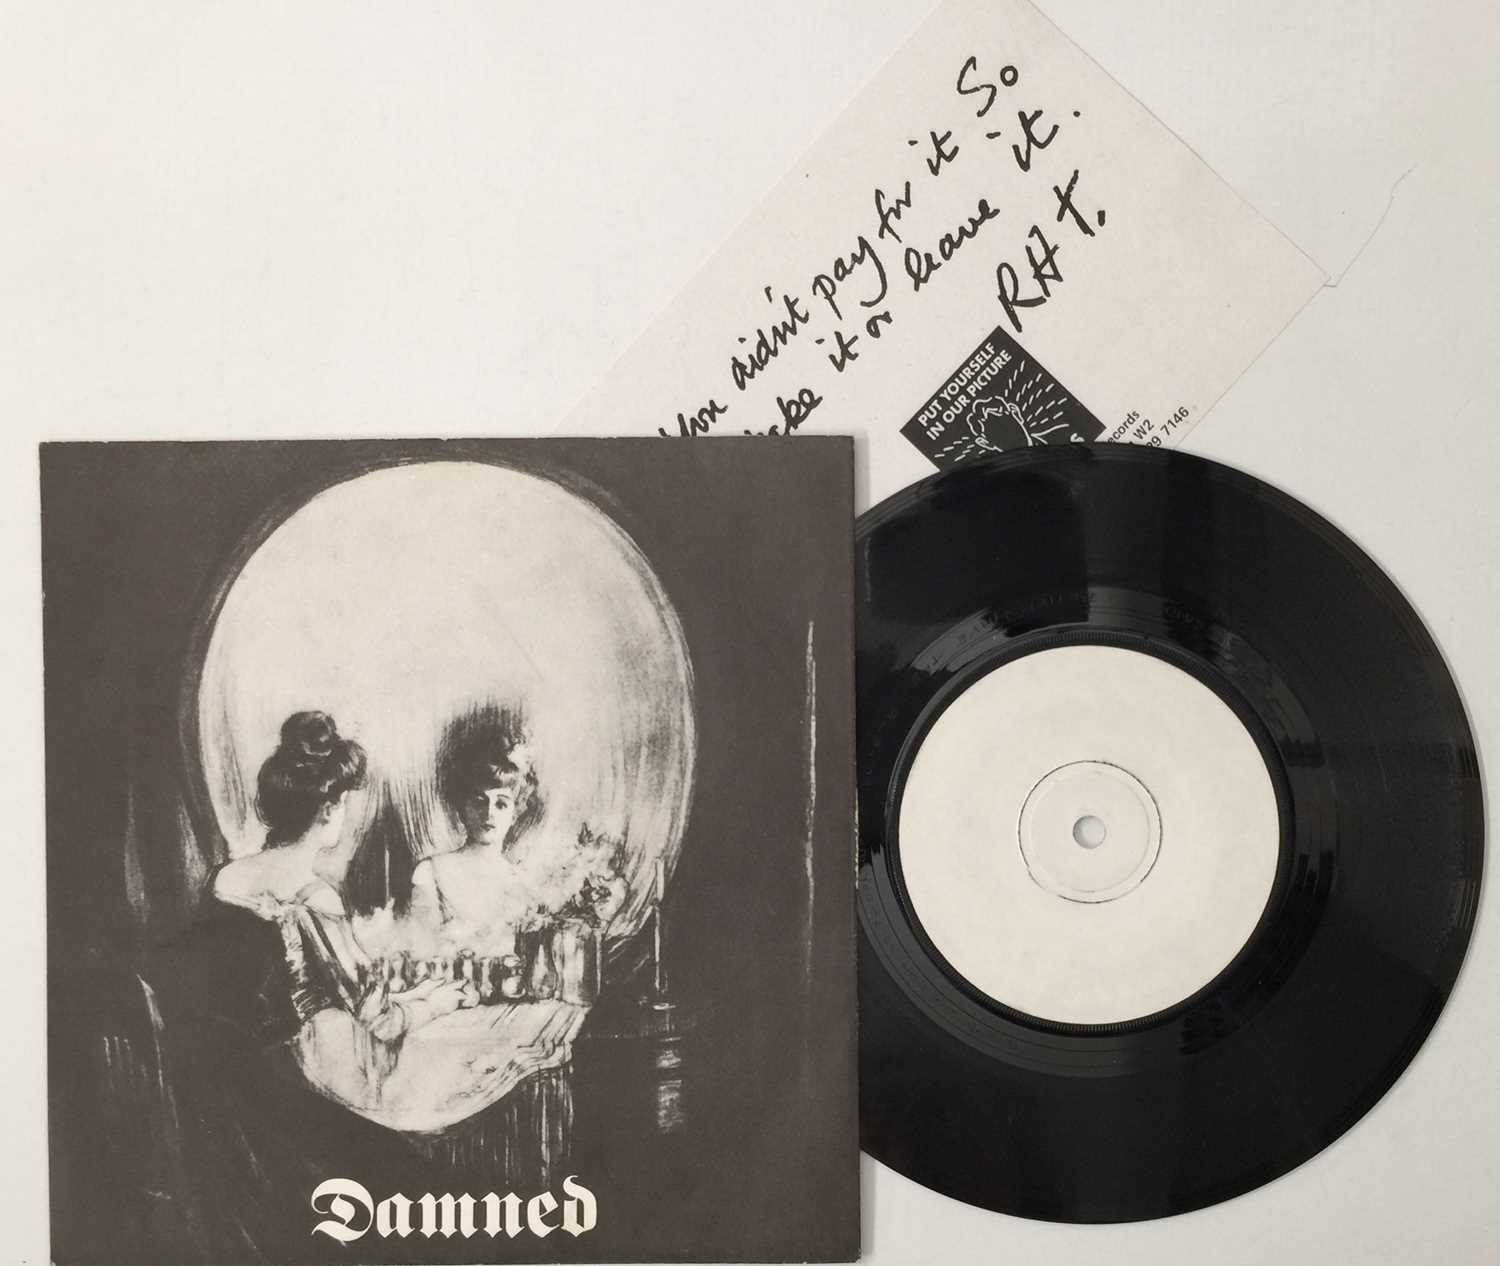 Lot 246 - THE DAMNED - STRETCHER CASE BABY 7" (UK W/ LABEL PROMO W/ COMPLIMENT SLIP - STIFF RECORDS)